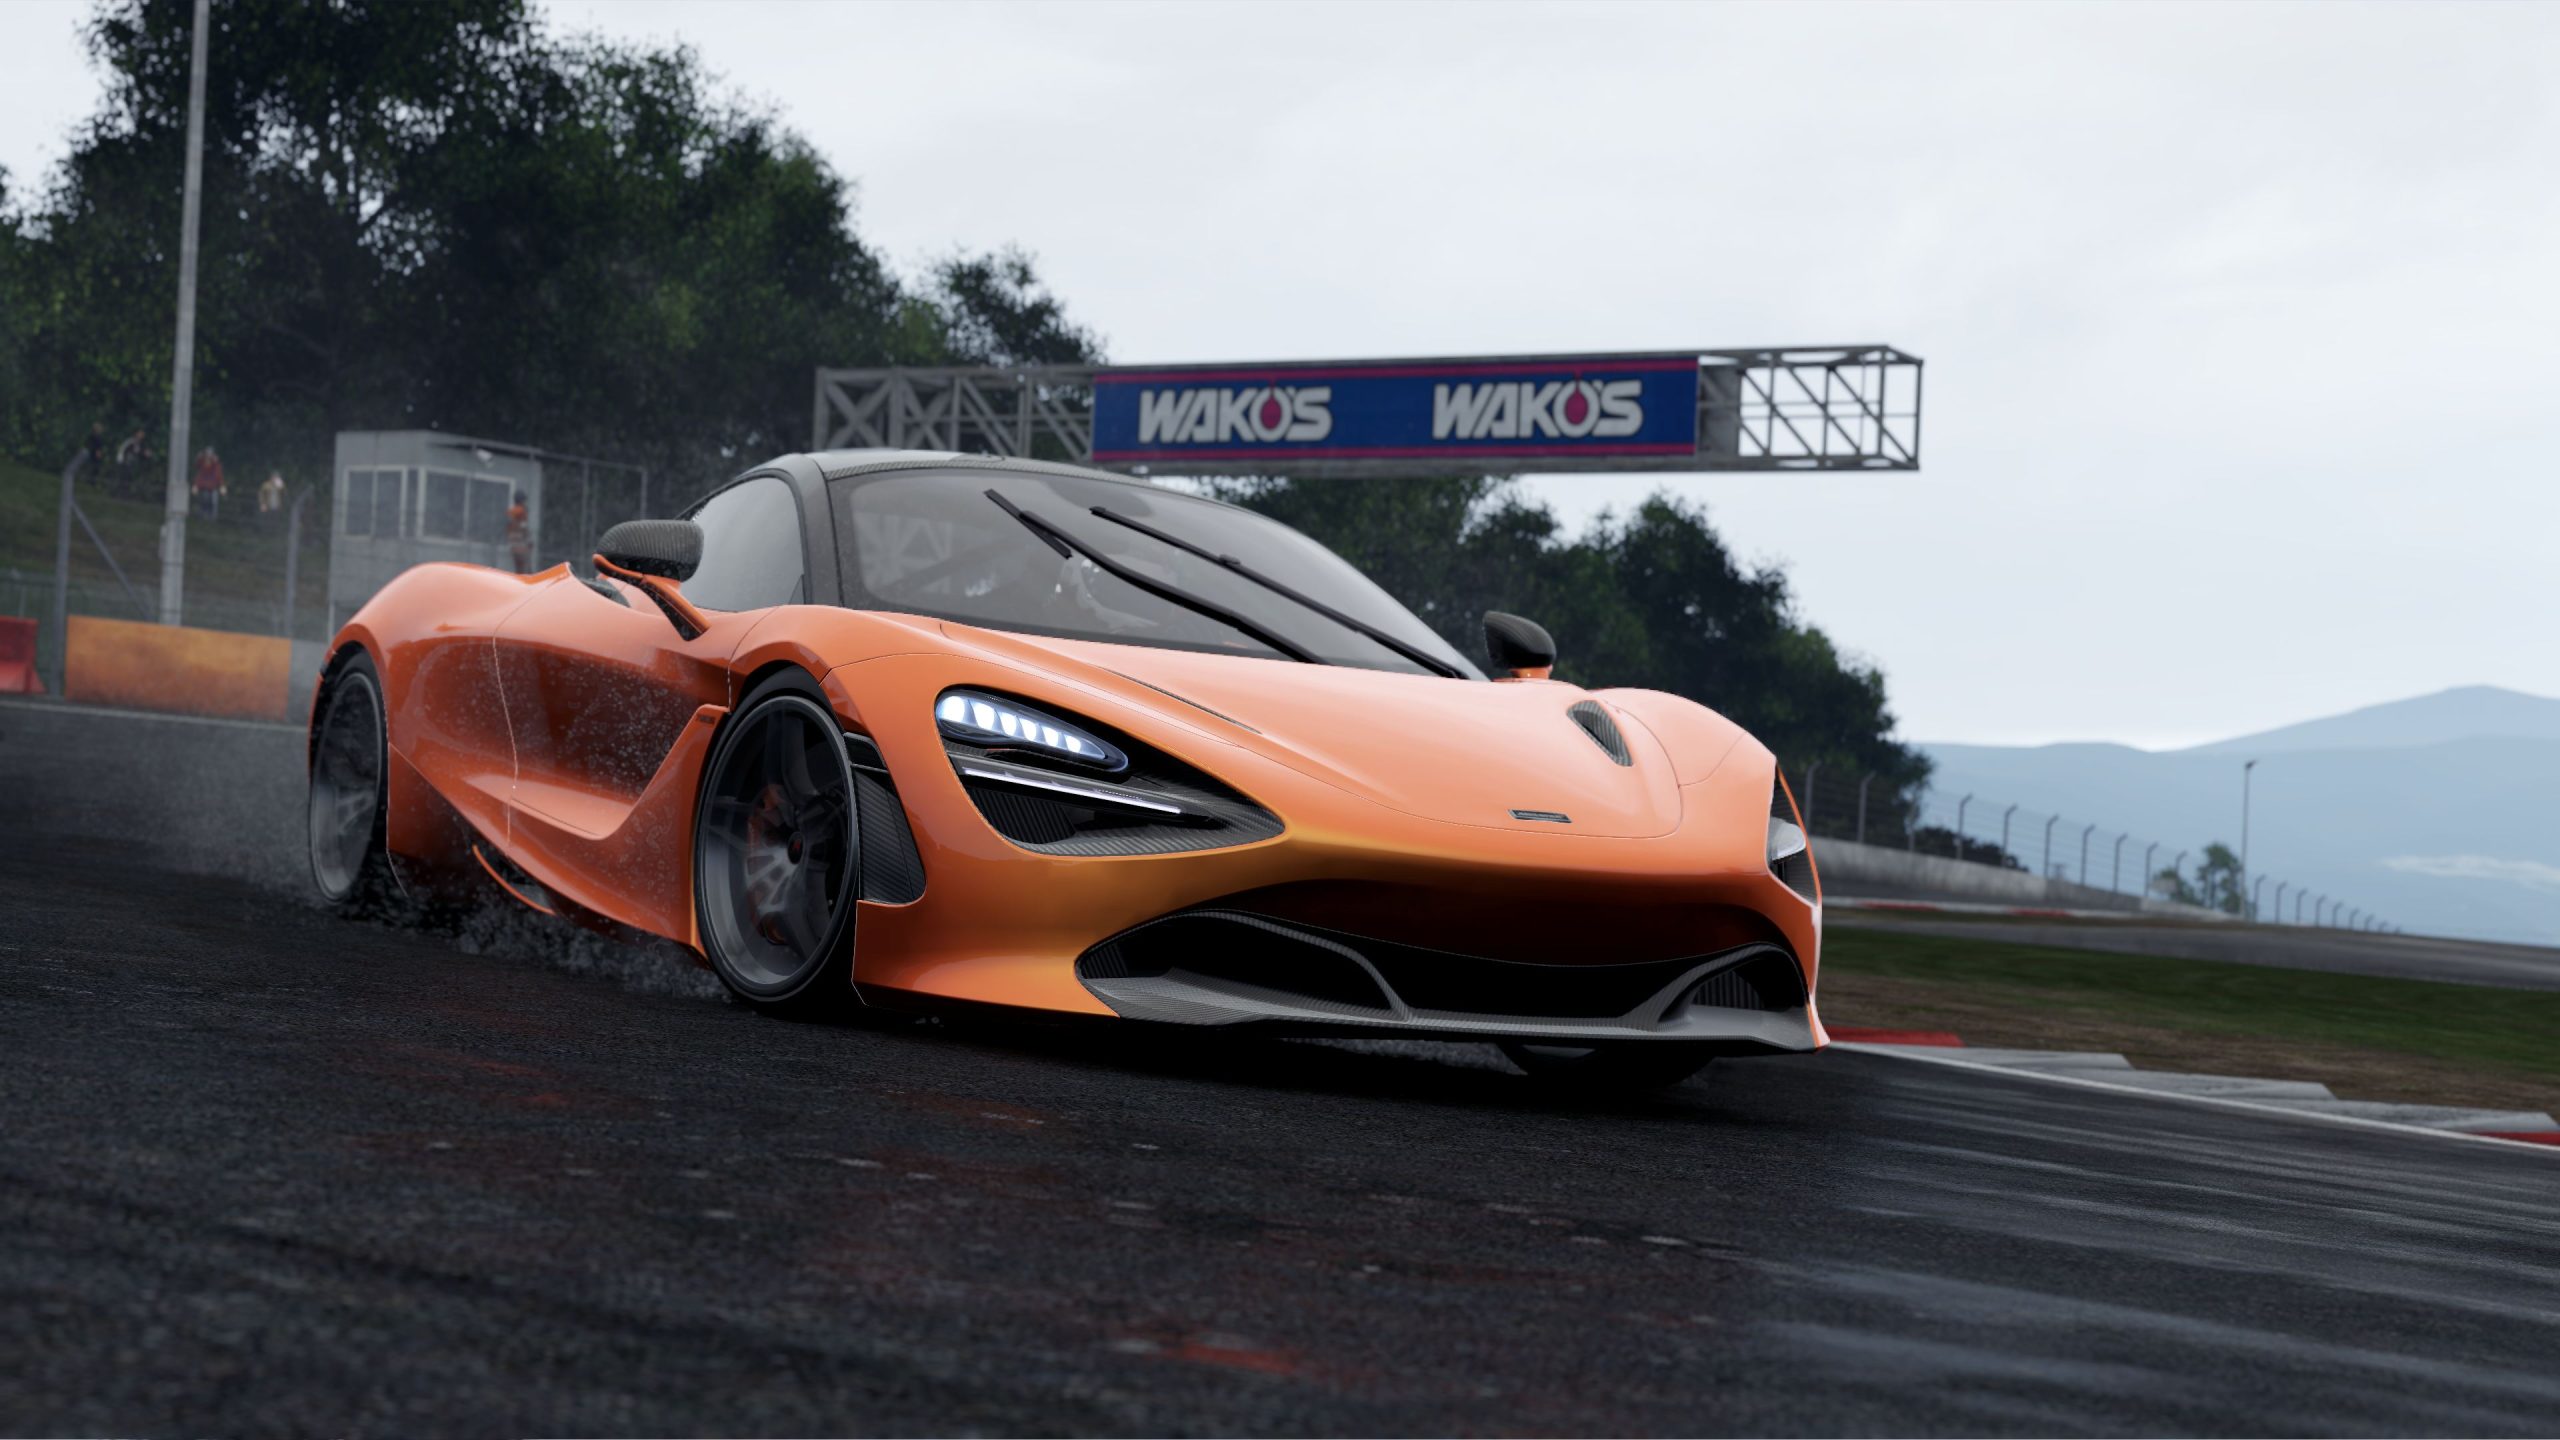 play3 Review: Project Cars 2: Die Rennsimulation im Test